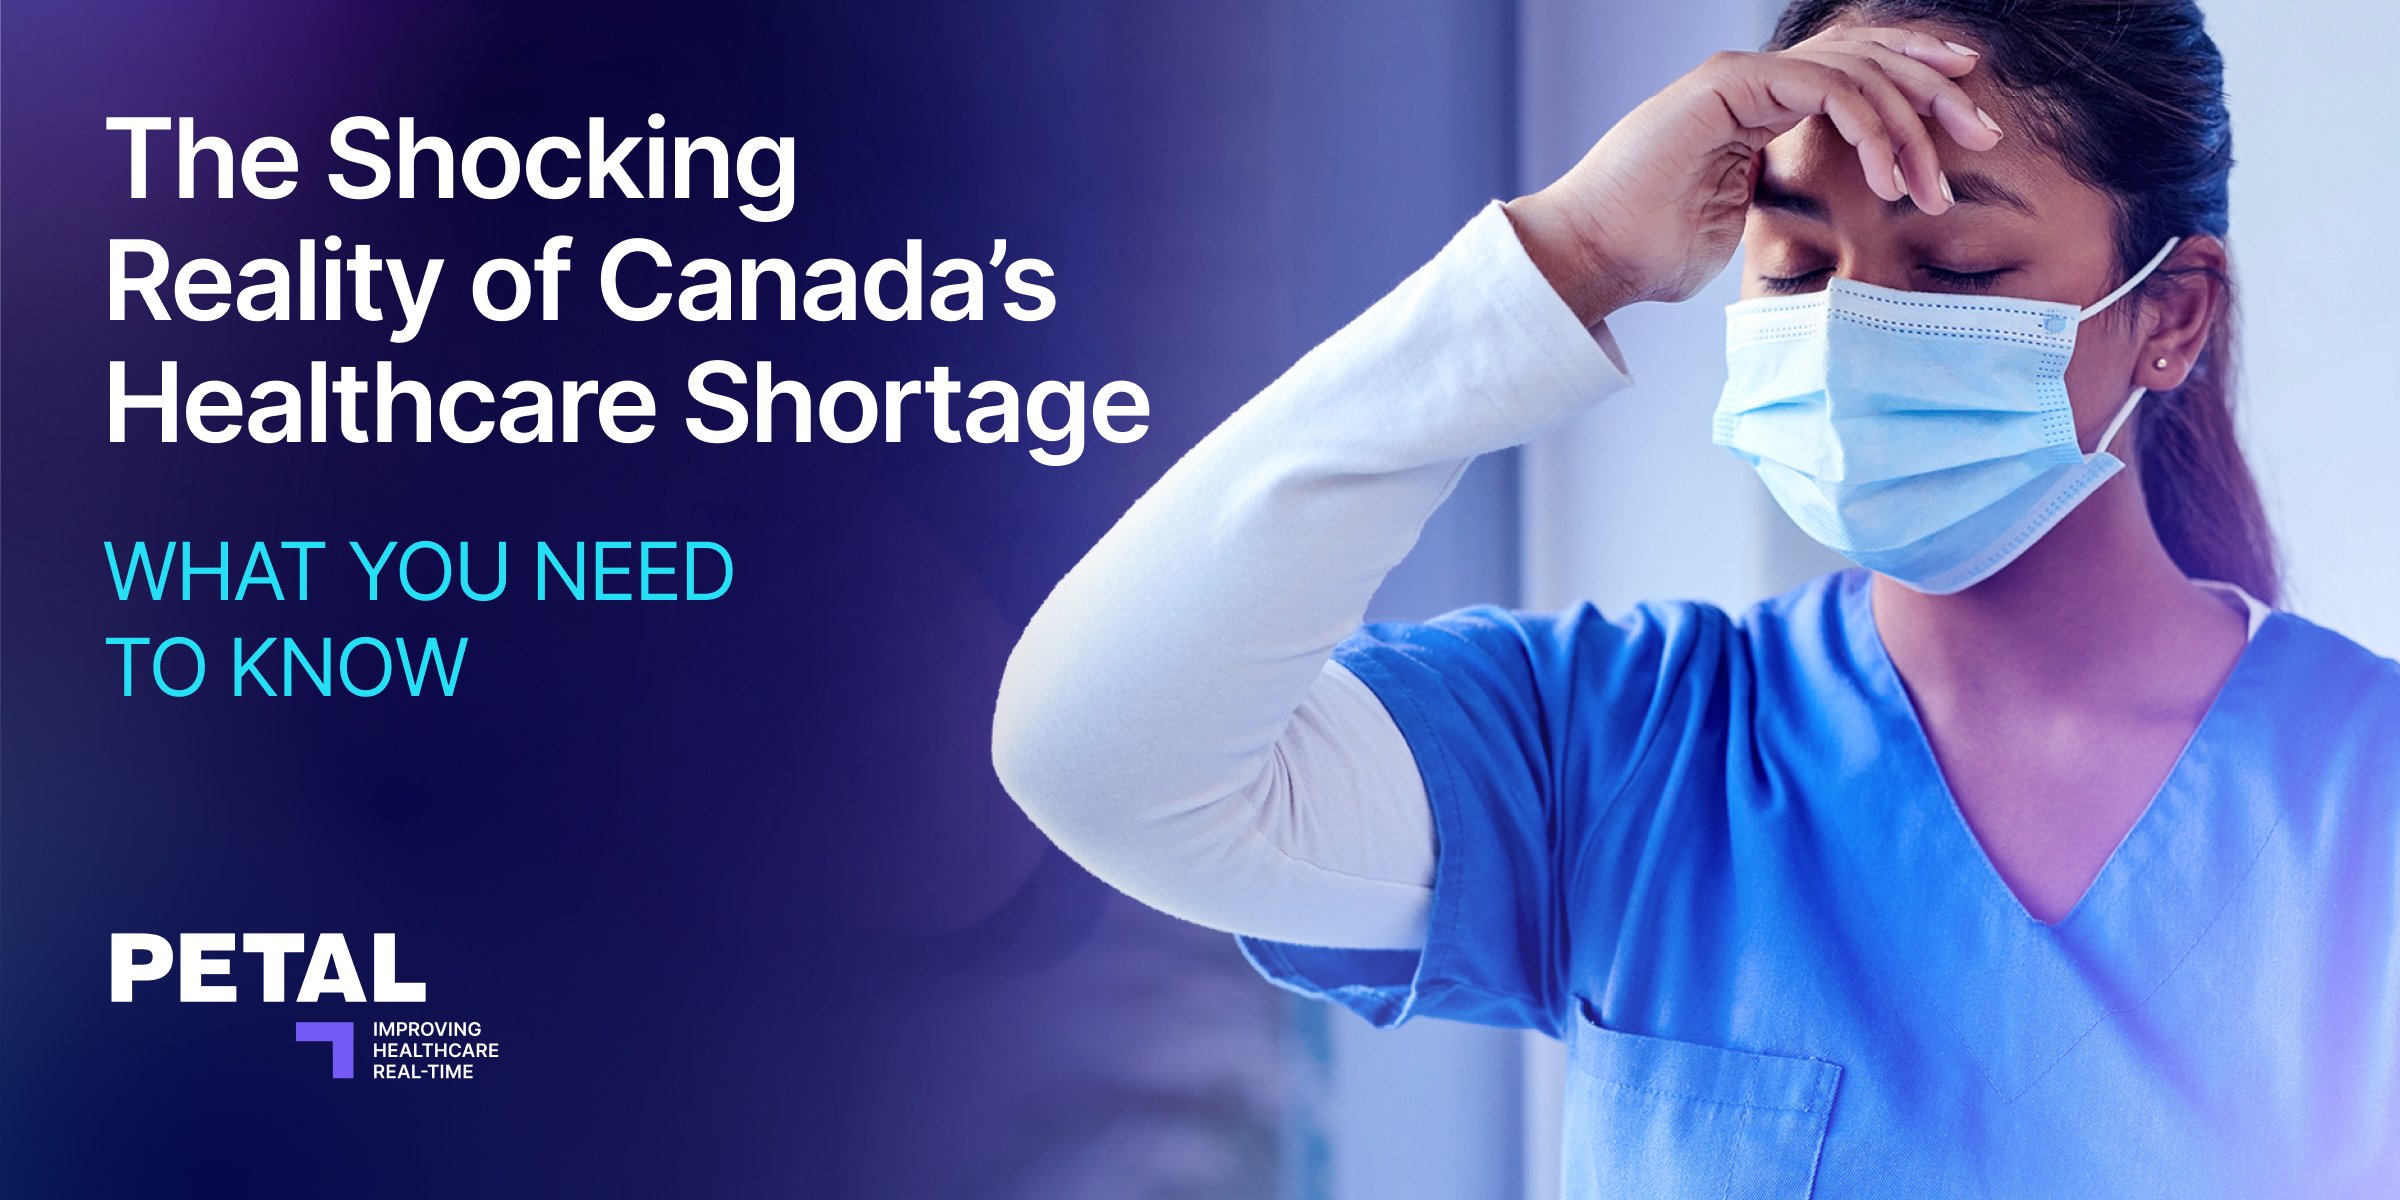 The Shocking Reality of Canada's Healthcare Shortage - What you need to know - A woman who seems to have a headache is holding her head.